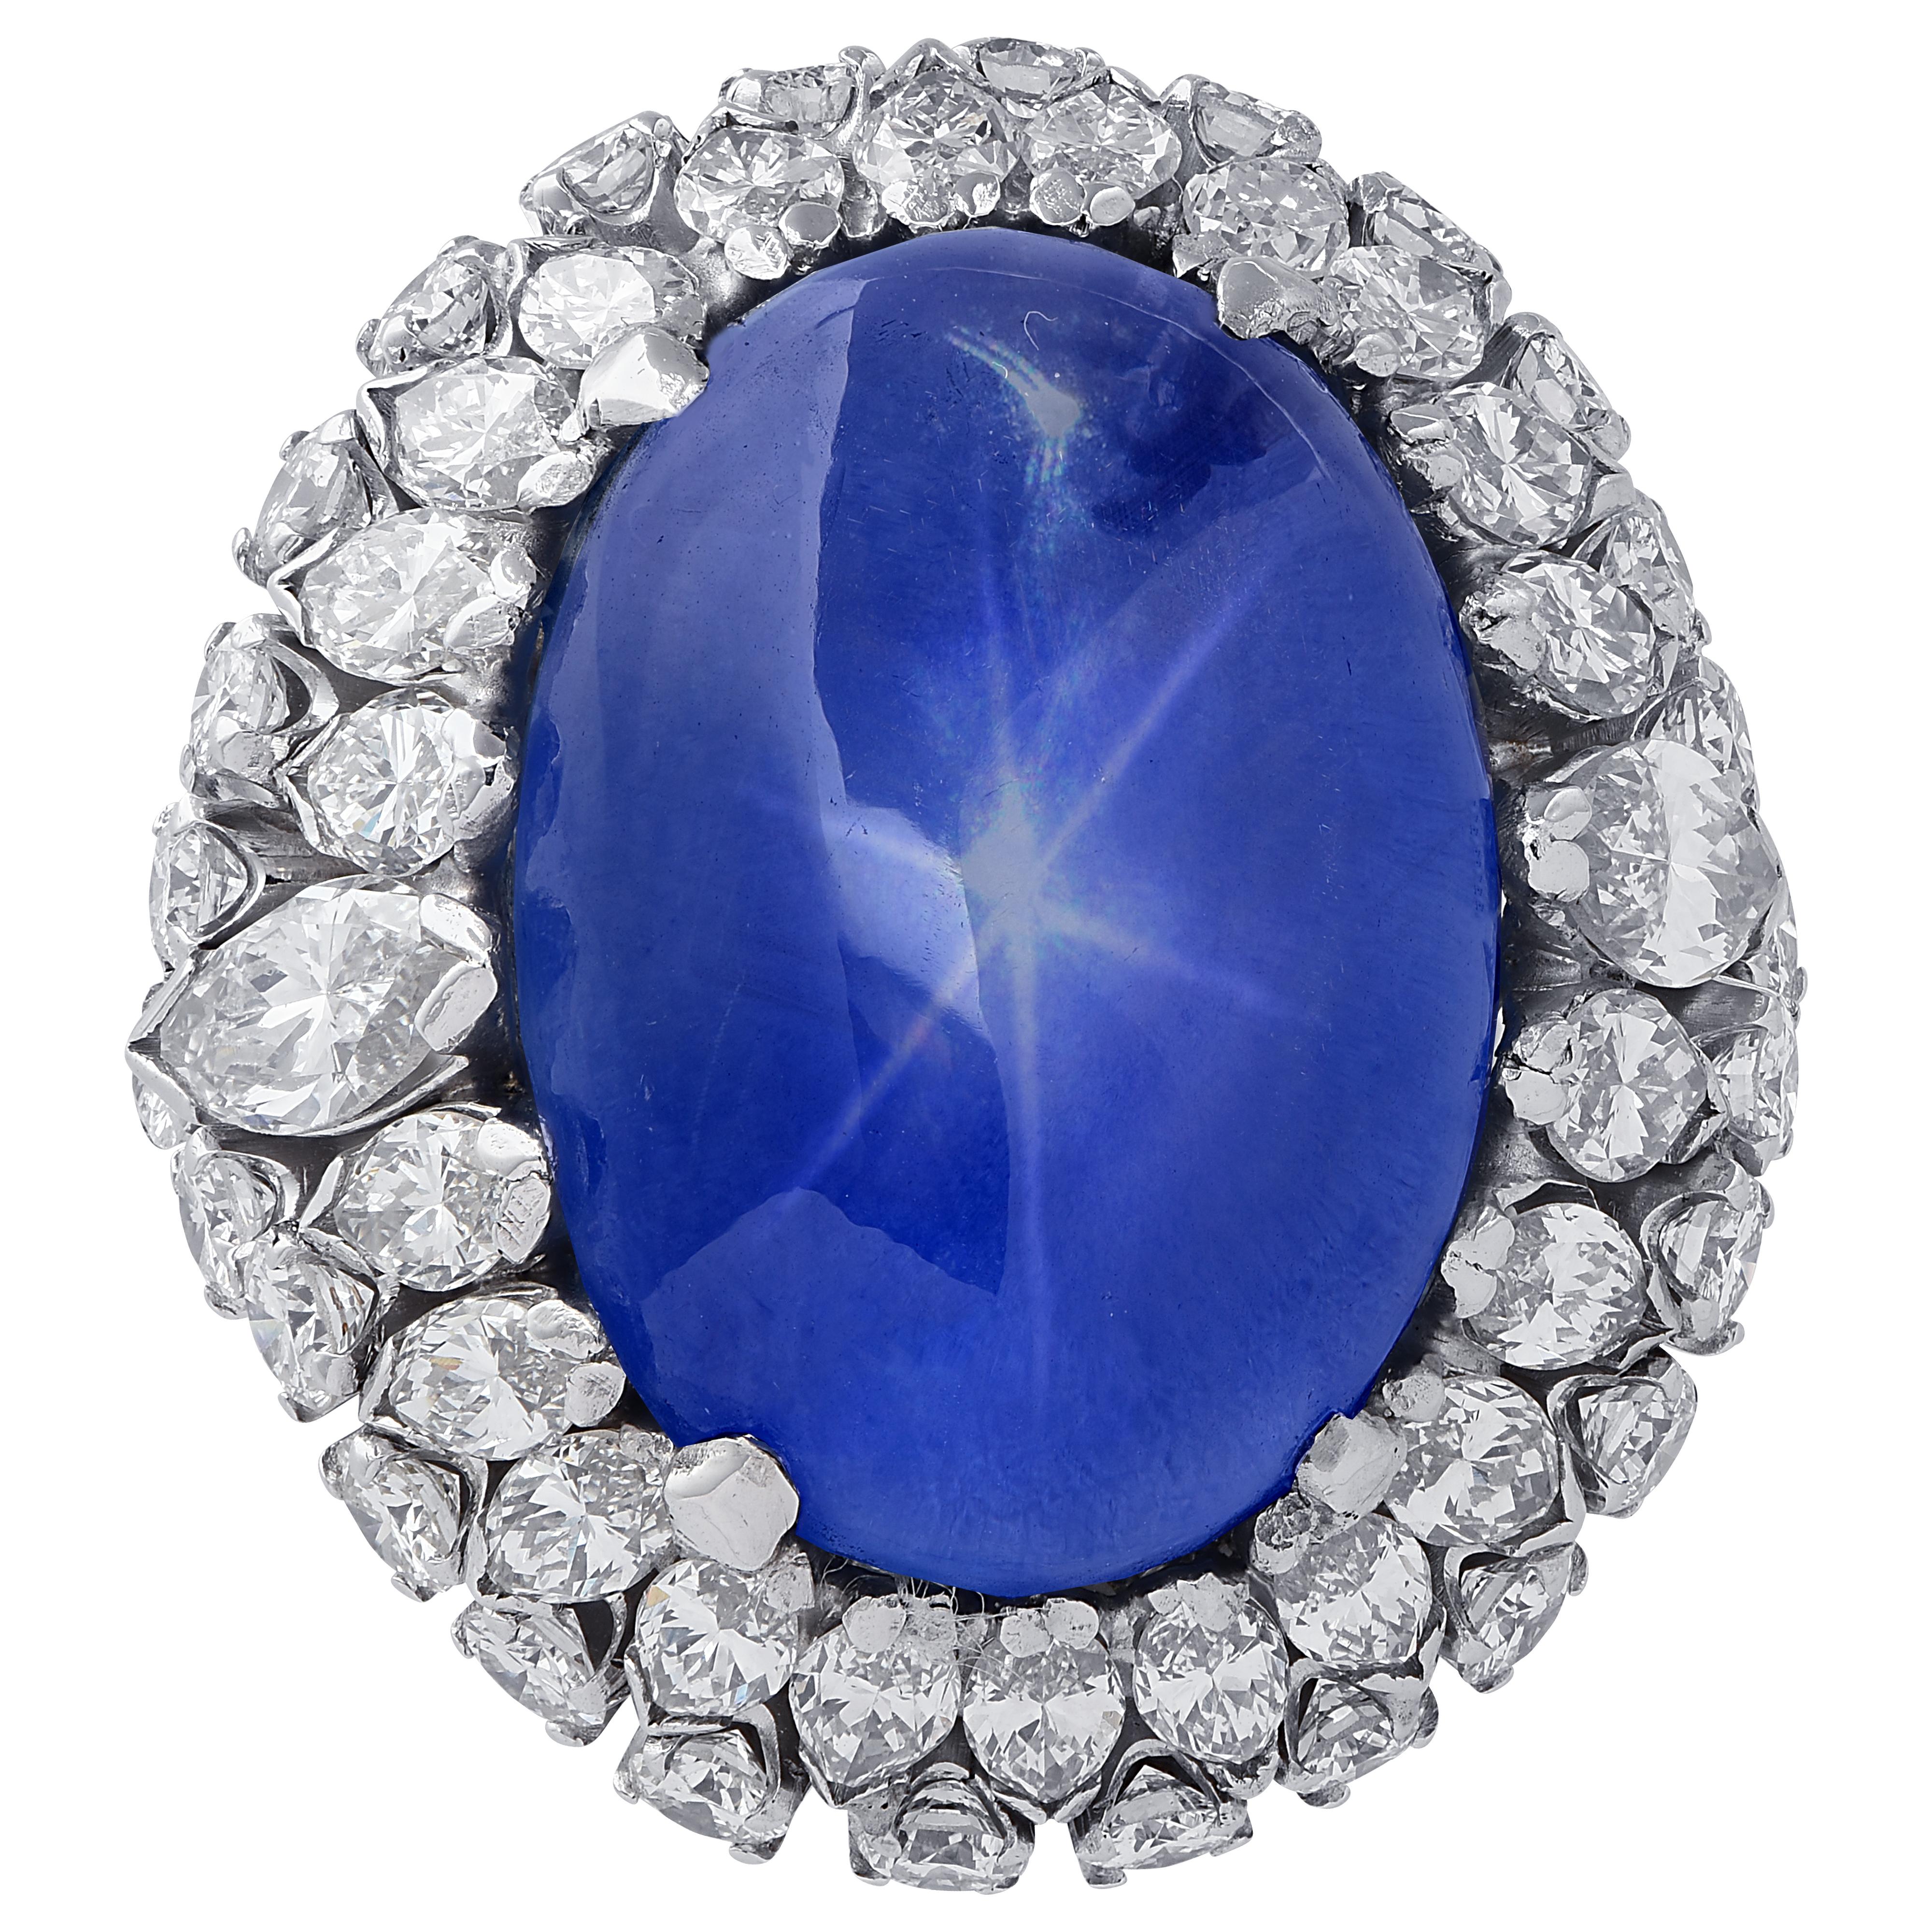 Spectacular ring crafted in platinum, showcasing a mesmerizing oval shape blue Star Sapphire cabochon weighing approximately 10 carats, resting on a bed of 51 marquise and round brilliant cut diamonds weighing approximately 2 carats total, G-I